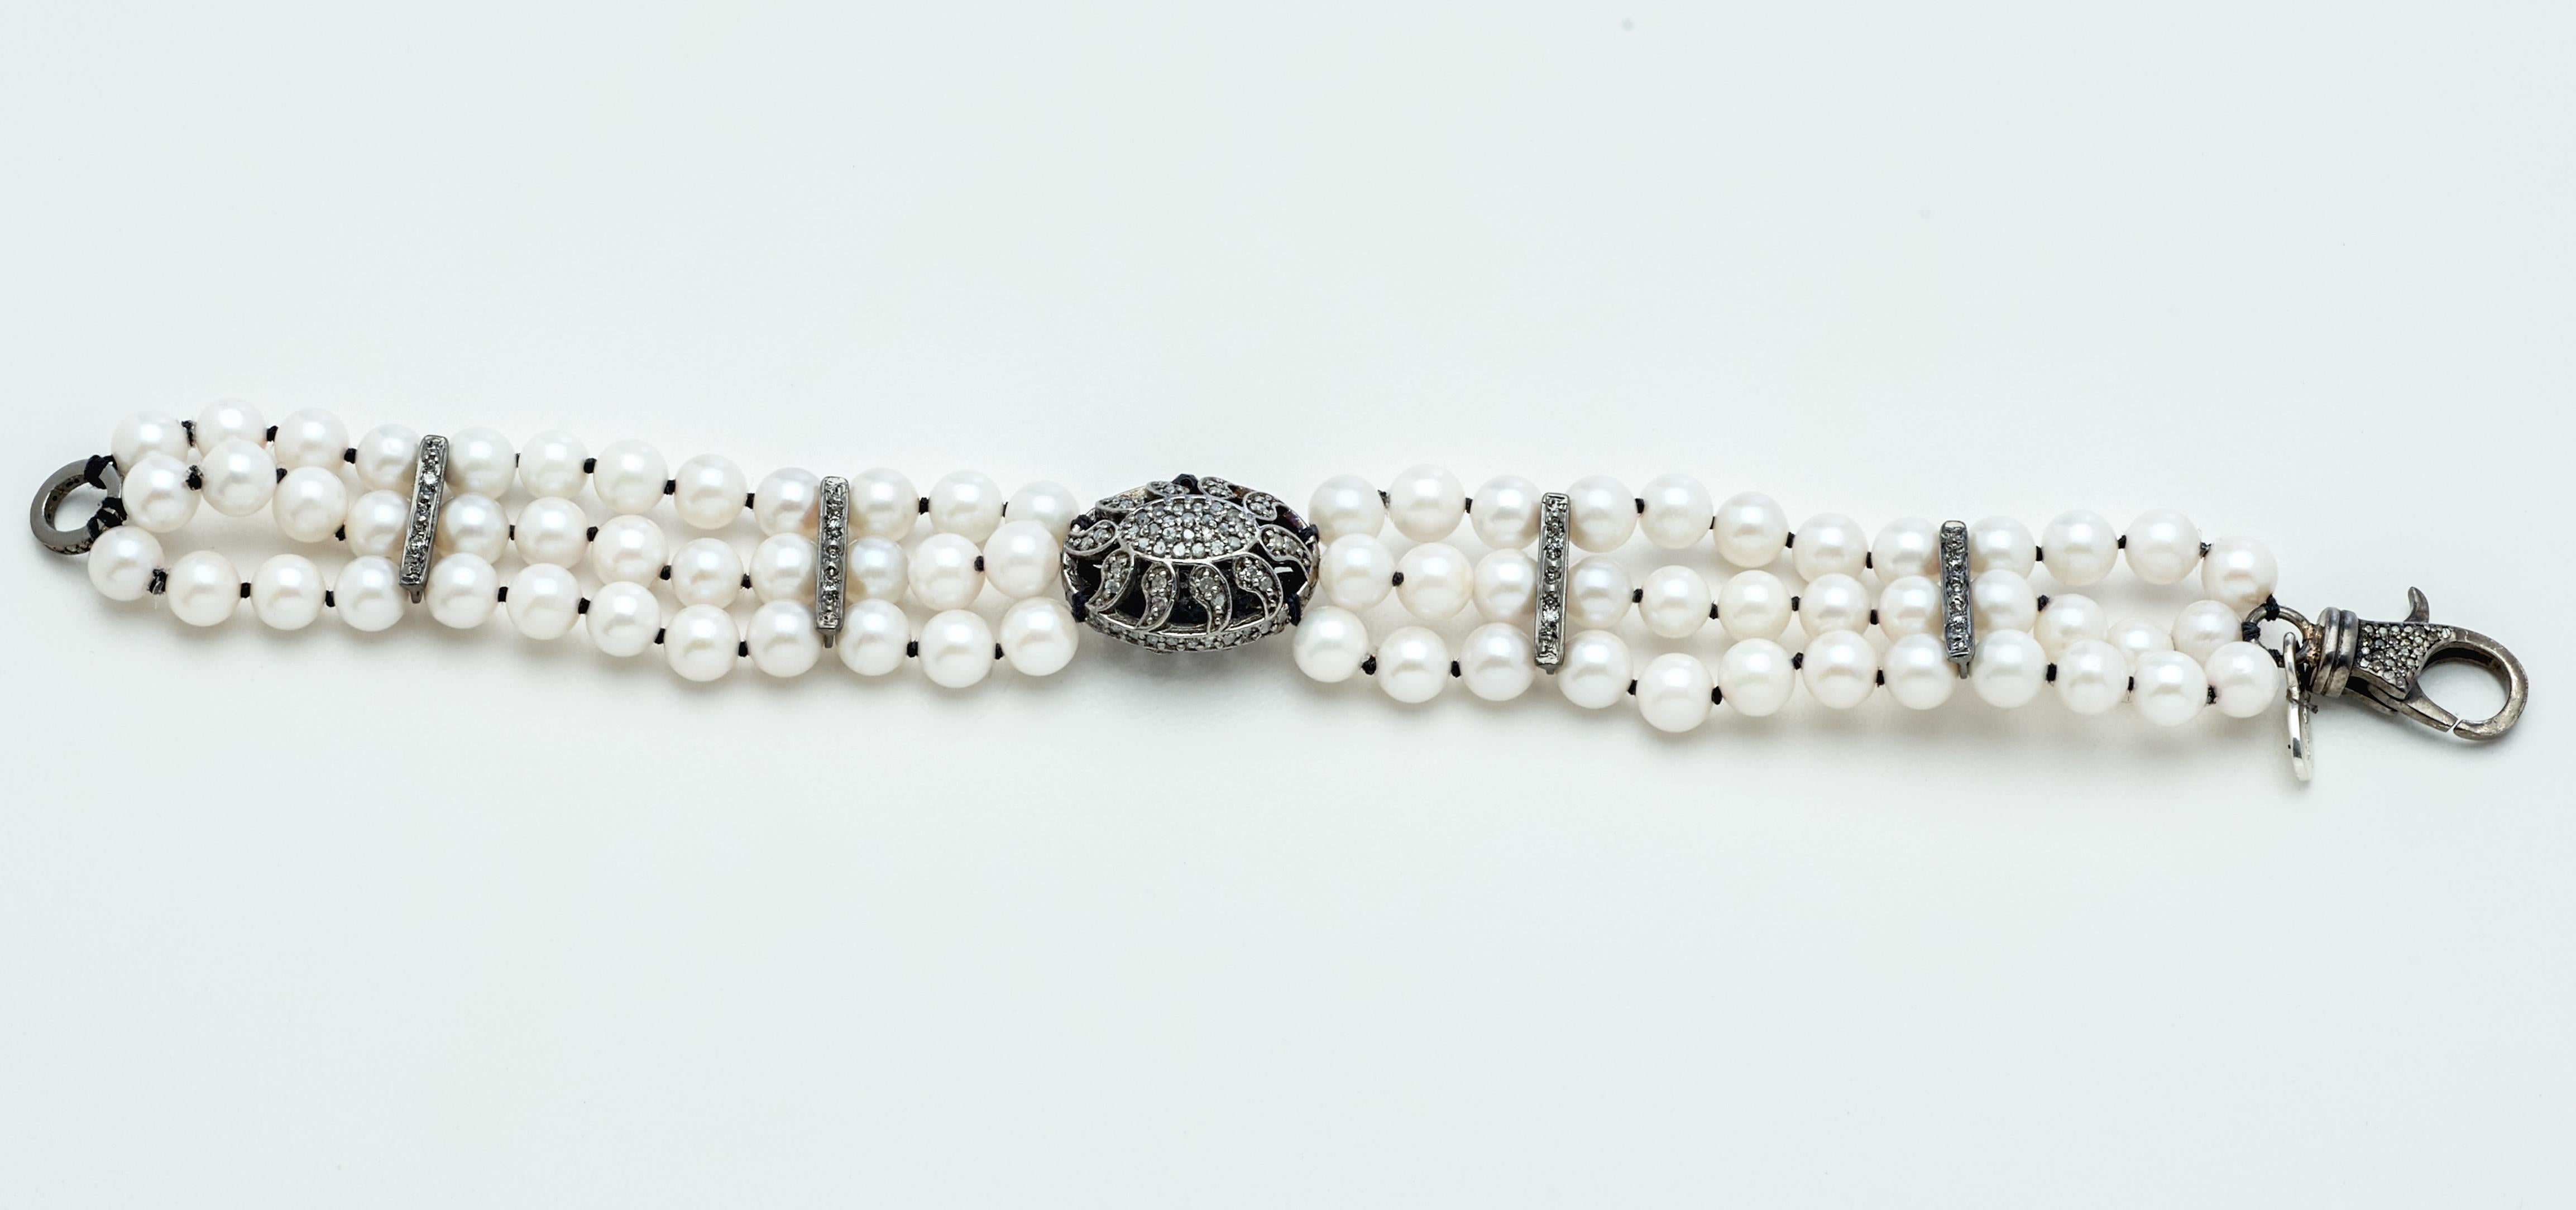 A vintage style diamond puff charm crowns three strands of lustrous 5-1/2mm x 5-3/4  AAA white round Akoya pearls to create this very attractive and unique new artisan bracelet. Matching diamond sterling silver bars and a fancy diamond silver clasp